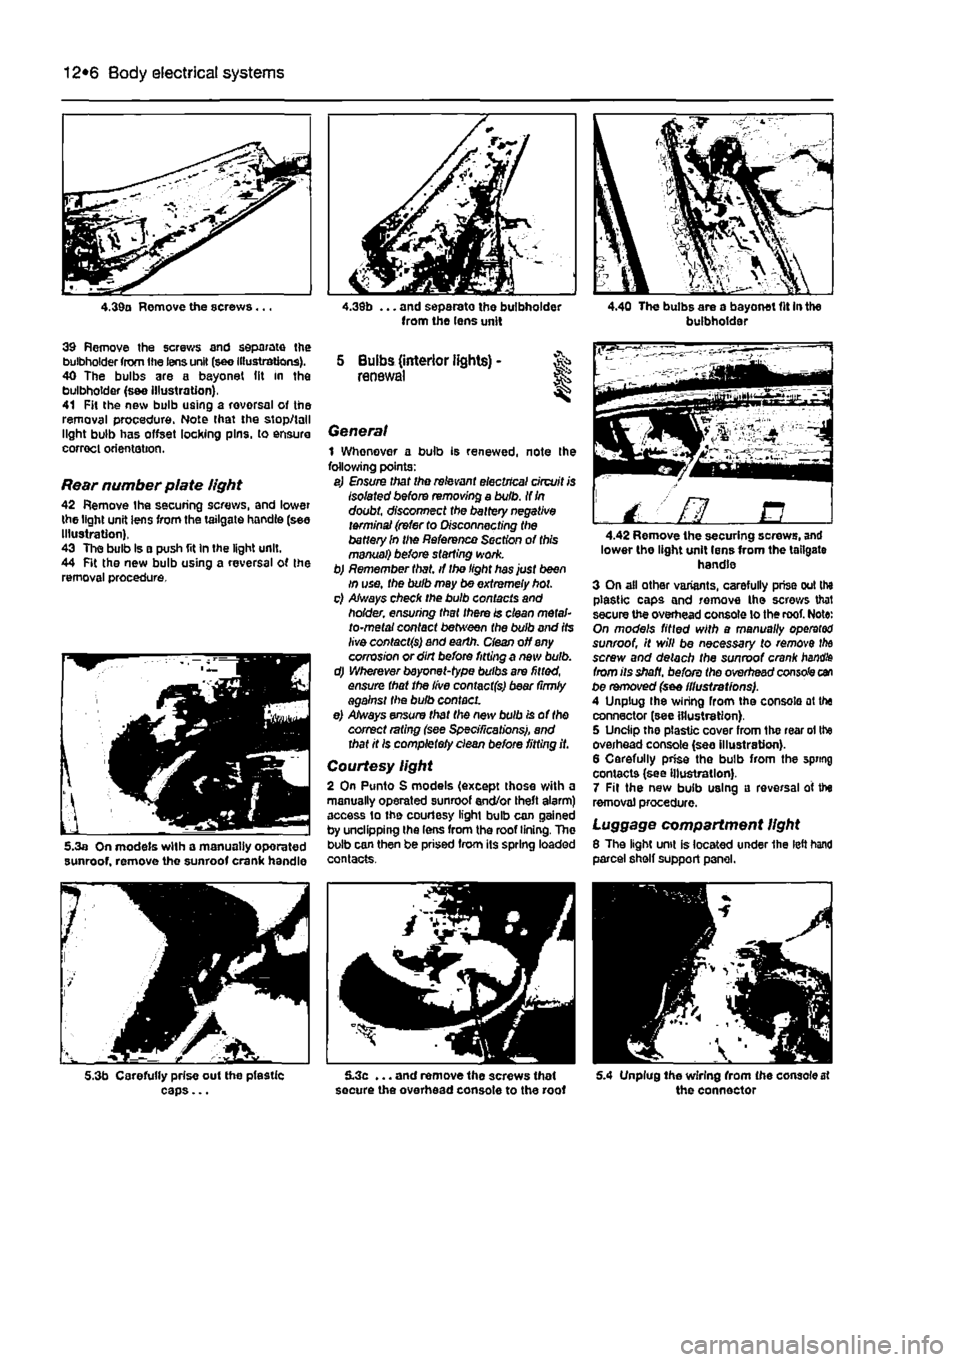 FIAT PUNTO 1999 176 / 1.G Workshop Manual 
12*6 Body electrical systems 
4.39a Remove the screws... 
39 Remove the screws and separate the bulbholder from the lens unit (see Illustrations). 40 The bulbs are a bayonet (it in the bulbholder (s&